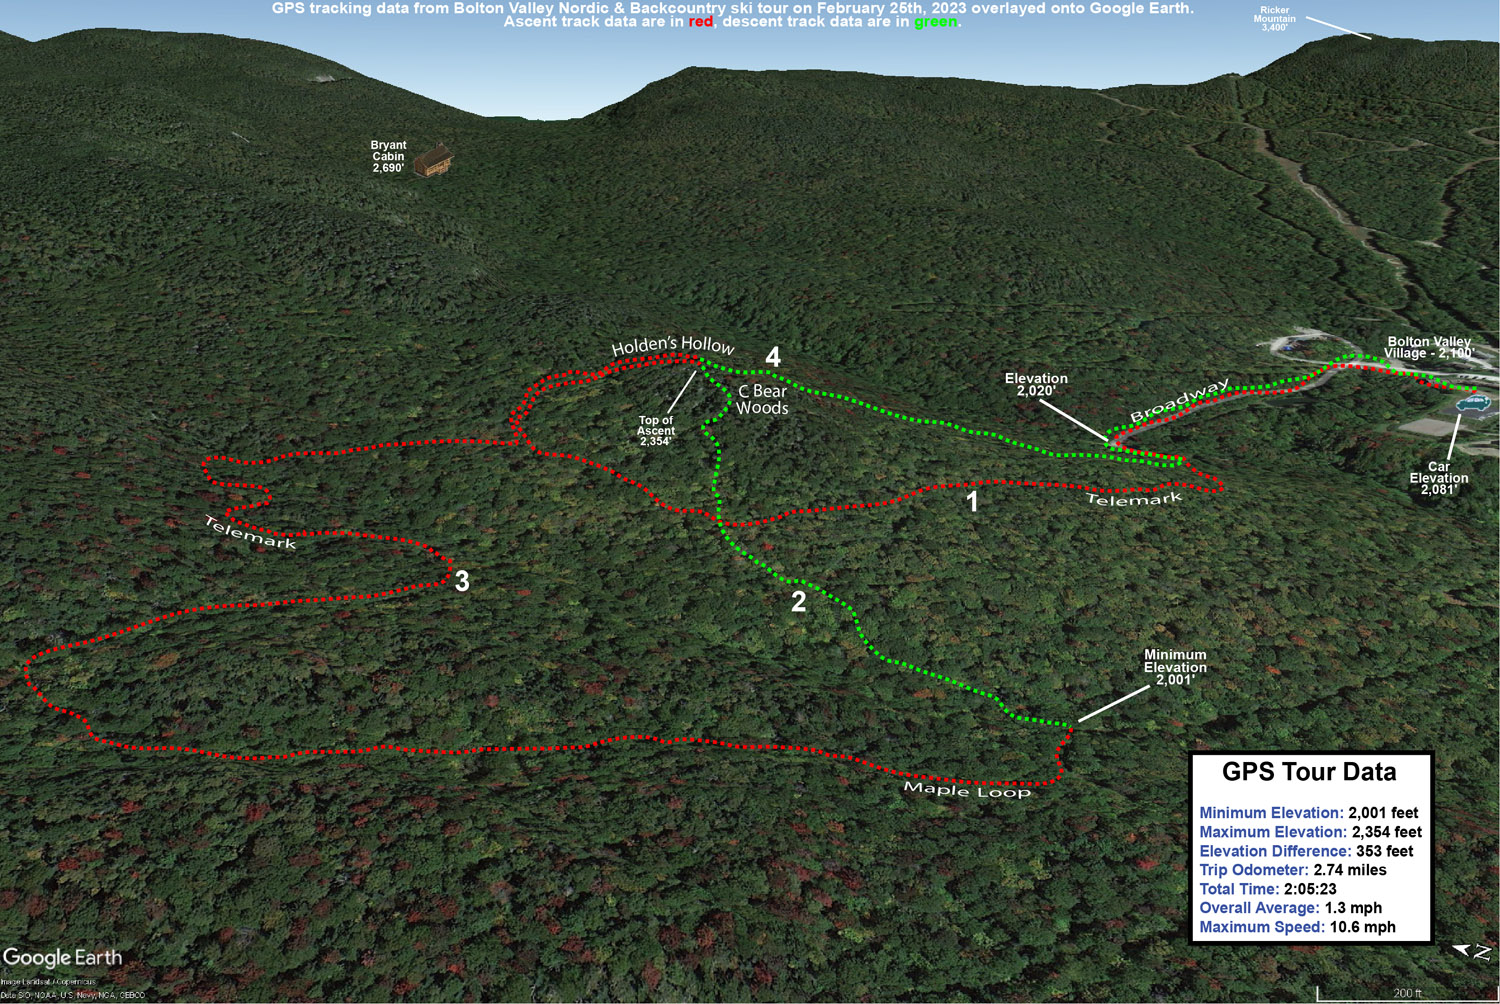 A Google Earth map with GPS tracking data from a ski tour on the Nordic and Backcountry Network at Bolton Valley Ski Resort in Vermont